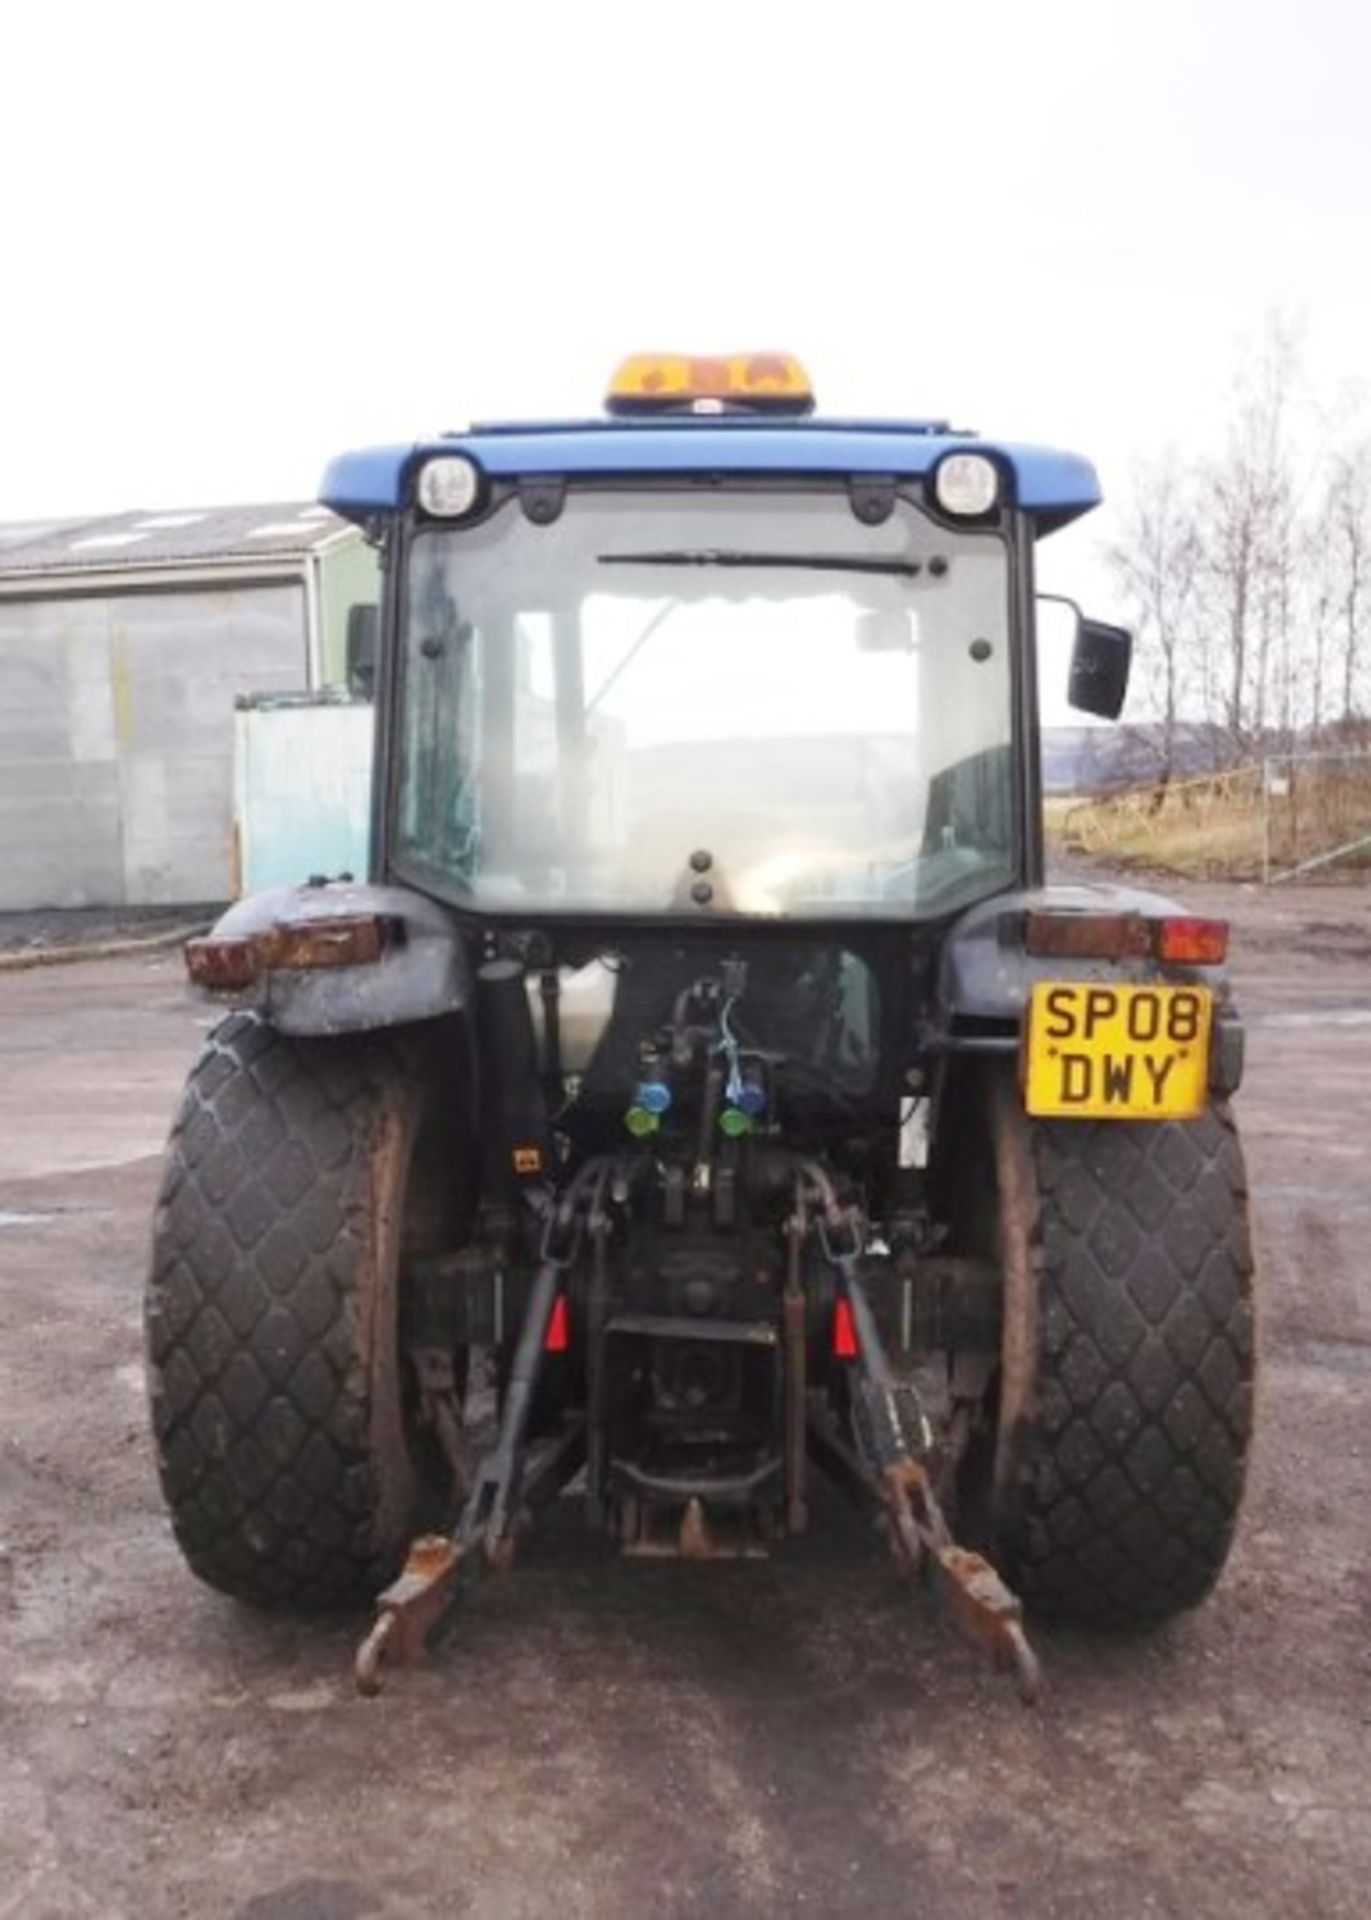 2008 NEW HOLLAND TN60 TRACTOR. REG NO SP08 DWY. SN 111054. GVW(TONNES) 4497, 3062HRS (NOT VERIFIED) - Image 4 of 40